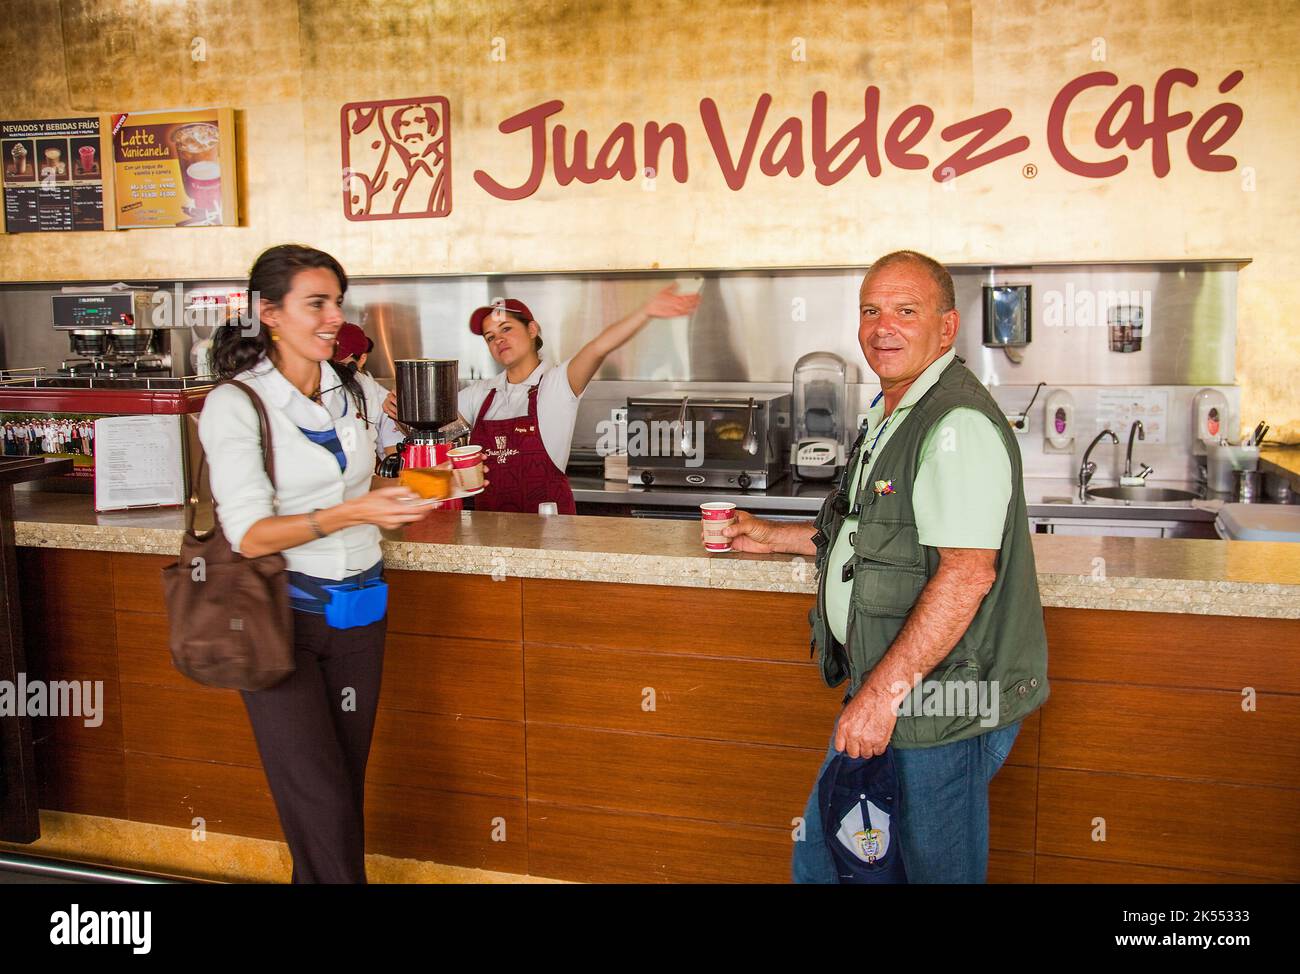 Colombia, Bogota A bar of Juan Valdez Cafe,a chain of coffee shops throughout the country. Stock Photo